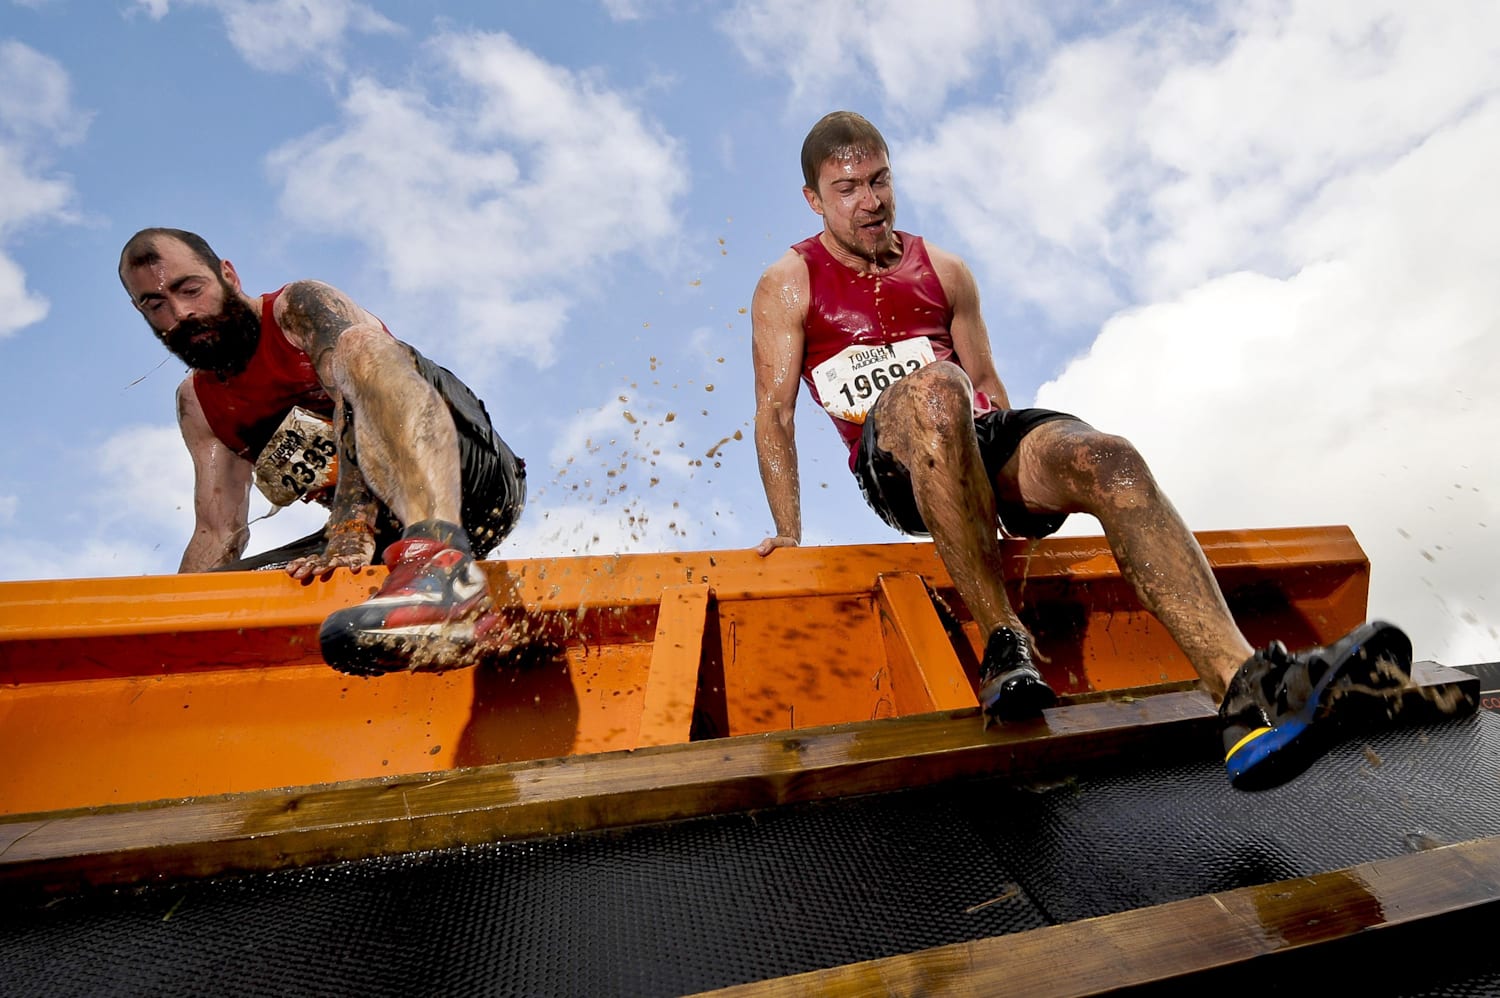 Boost endurance for obstacle course races